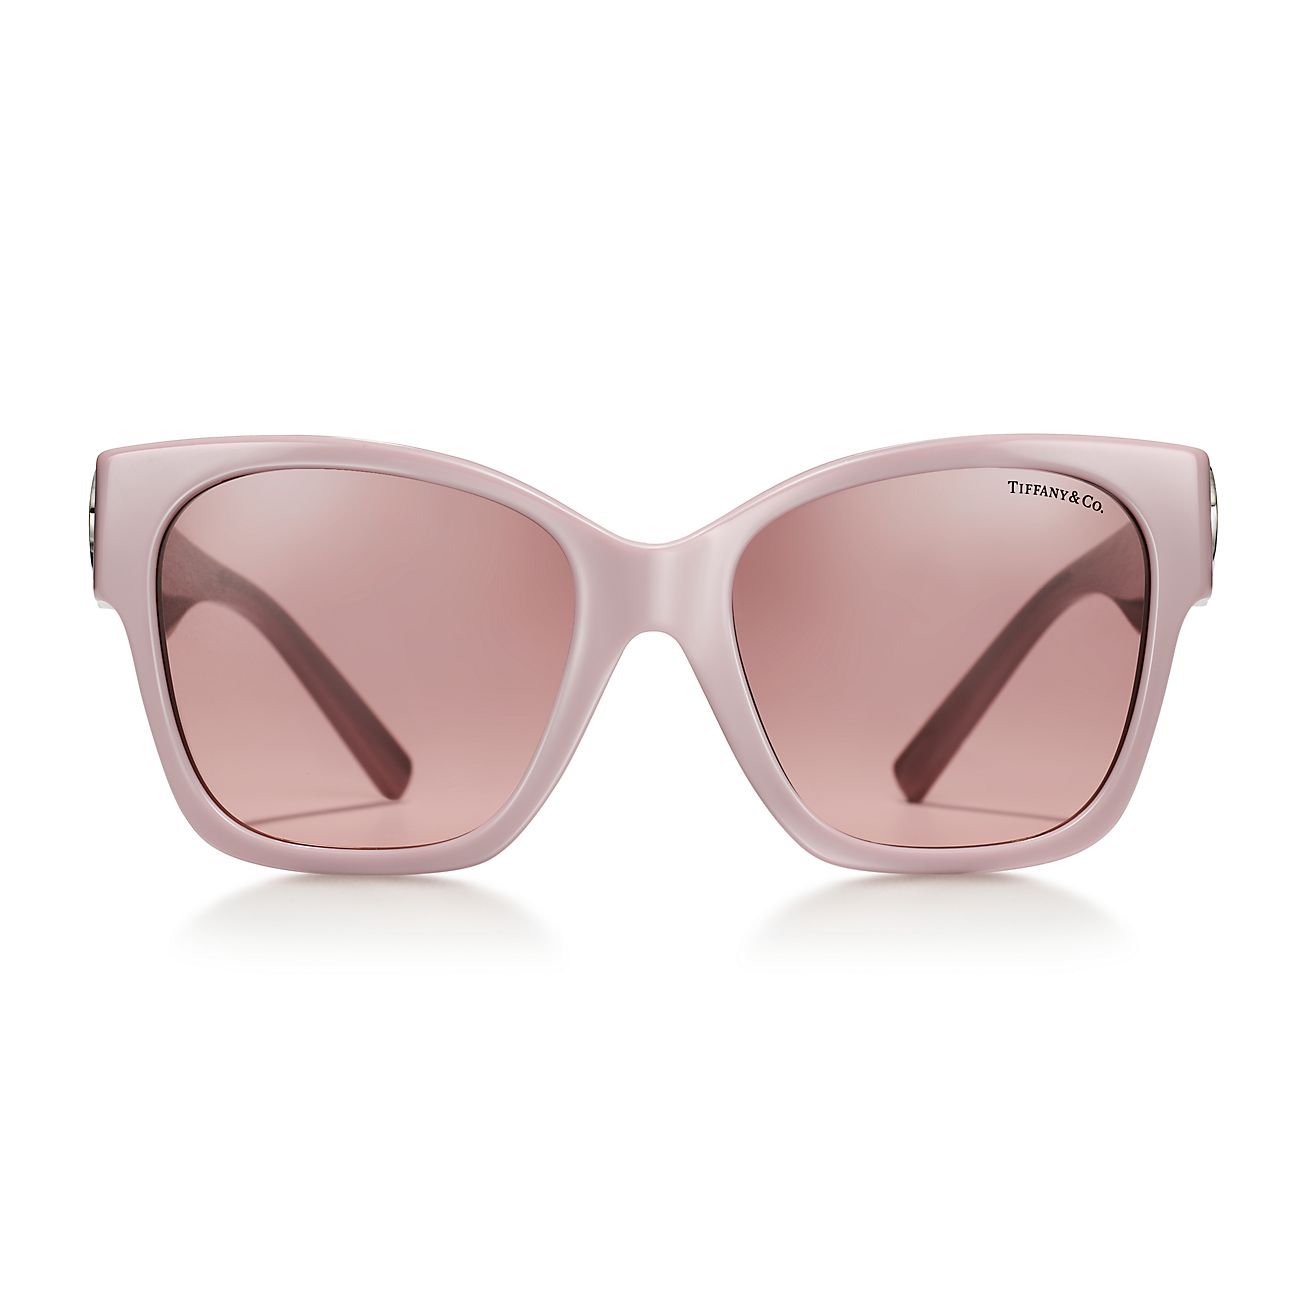 Return to Tiffany® Sunglasses in Dusty Pink Acetate with Pink Gradient  Lenses | Tiffany u0026 Co.